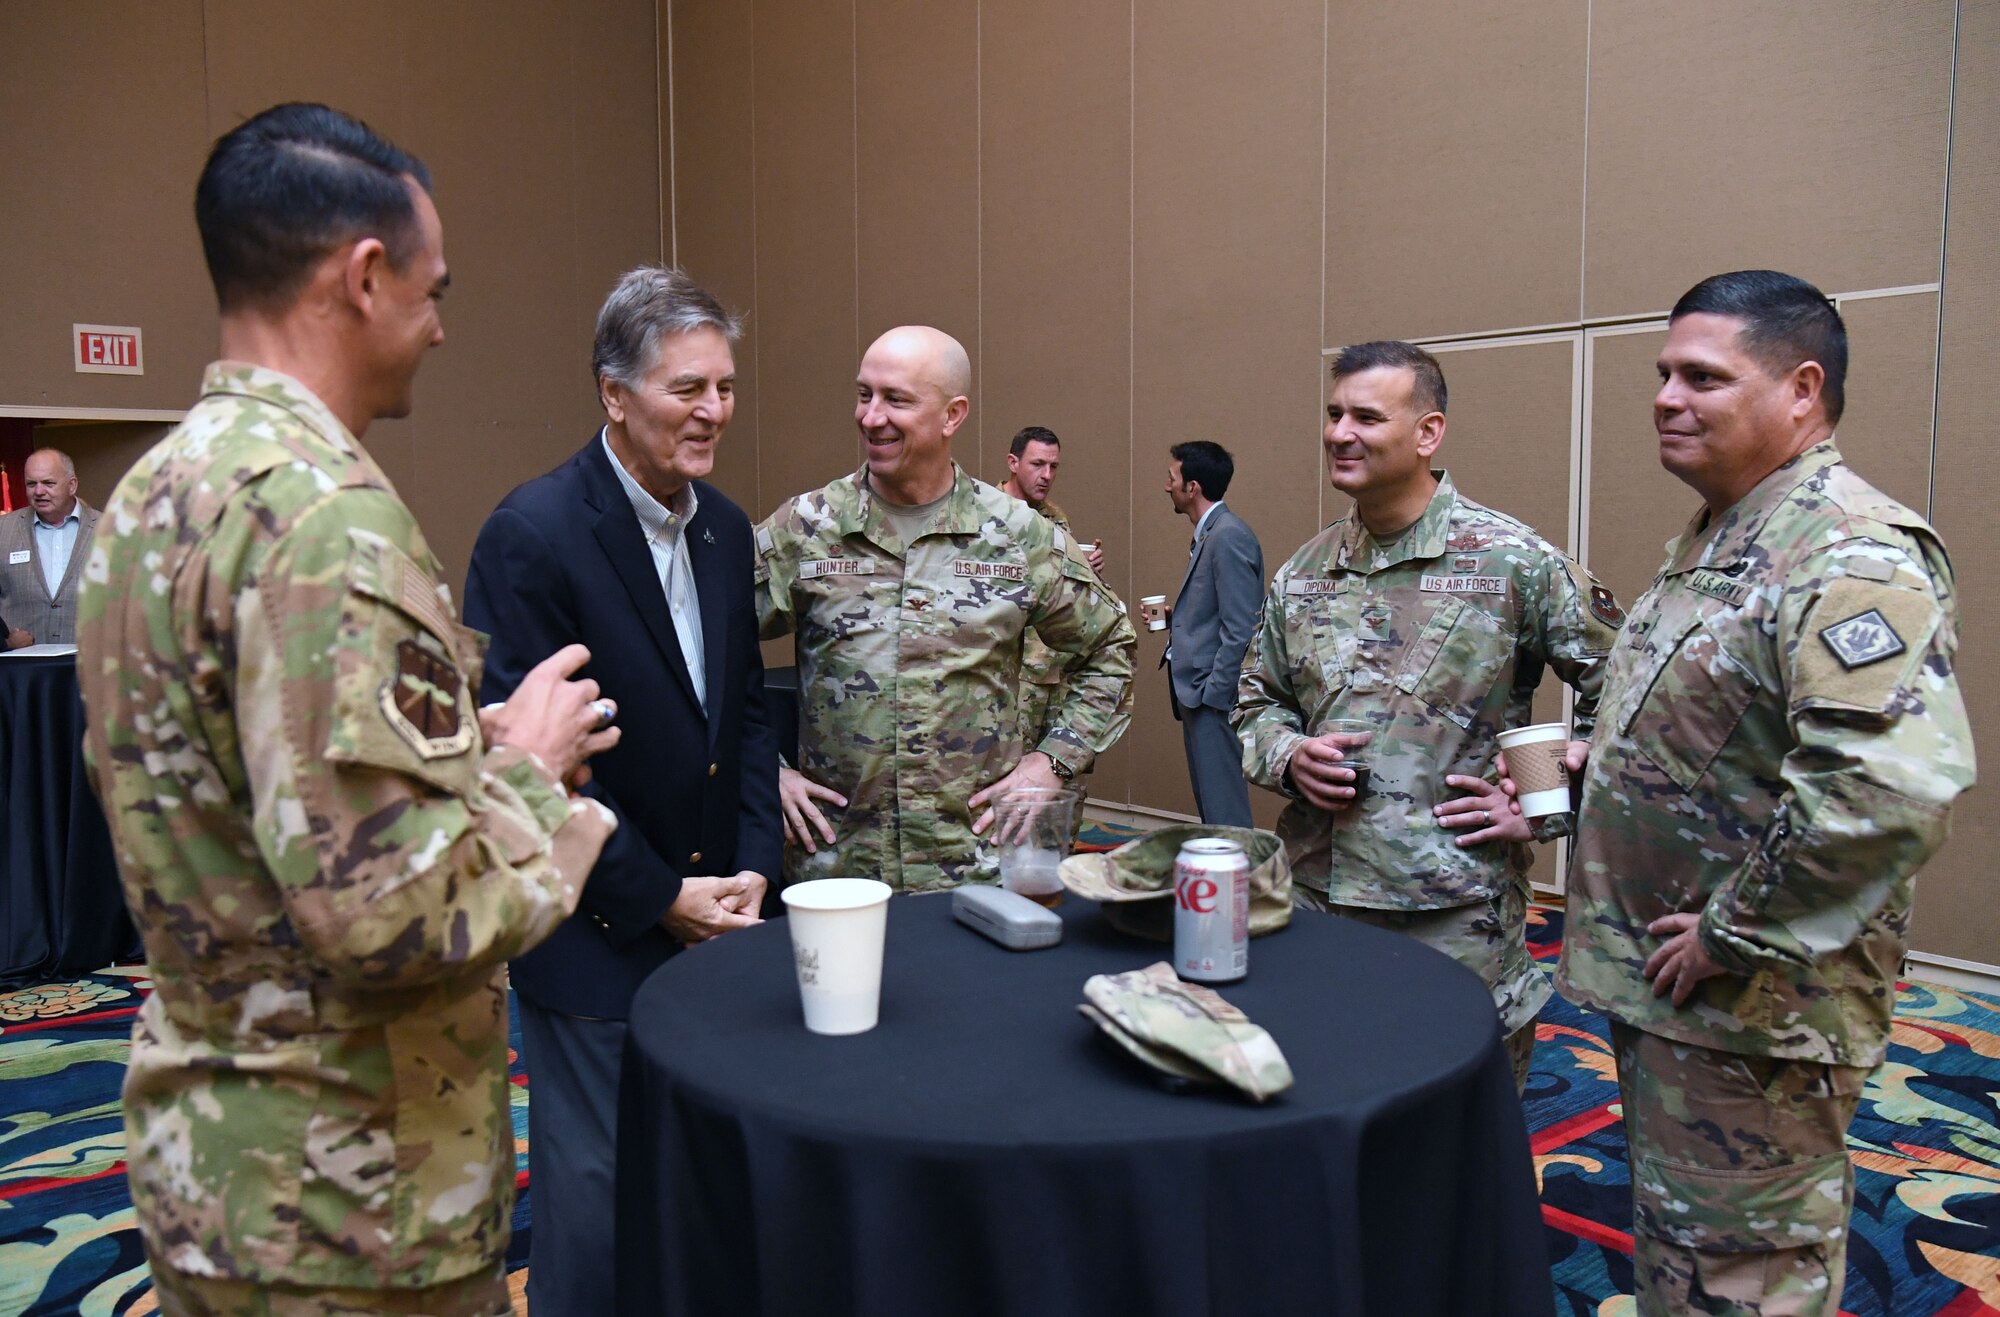 Mayor Andrew "FoFo" Gilich, Mayor of Biloxi, Mississippi, visits with Gulf Coast military leadership during the 41st Annual Salute to the Military inside the Beau Rivage Resort and Casino in Biloxi, Mississippi, Oct. 4, 2022. The Mississippi Gulf Coast Chamber of Commerce hosted event recognized the men and women who serve in the military along the Gulf Coast. (U.S. Air Force photo by Kemberly Groue)